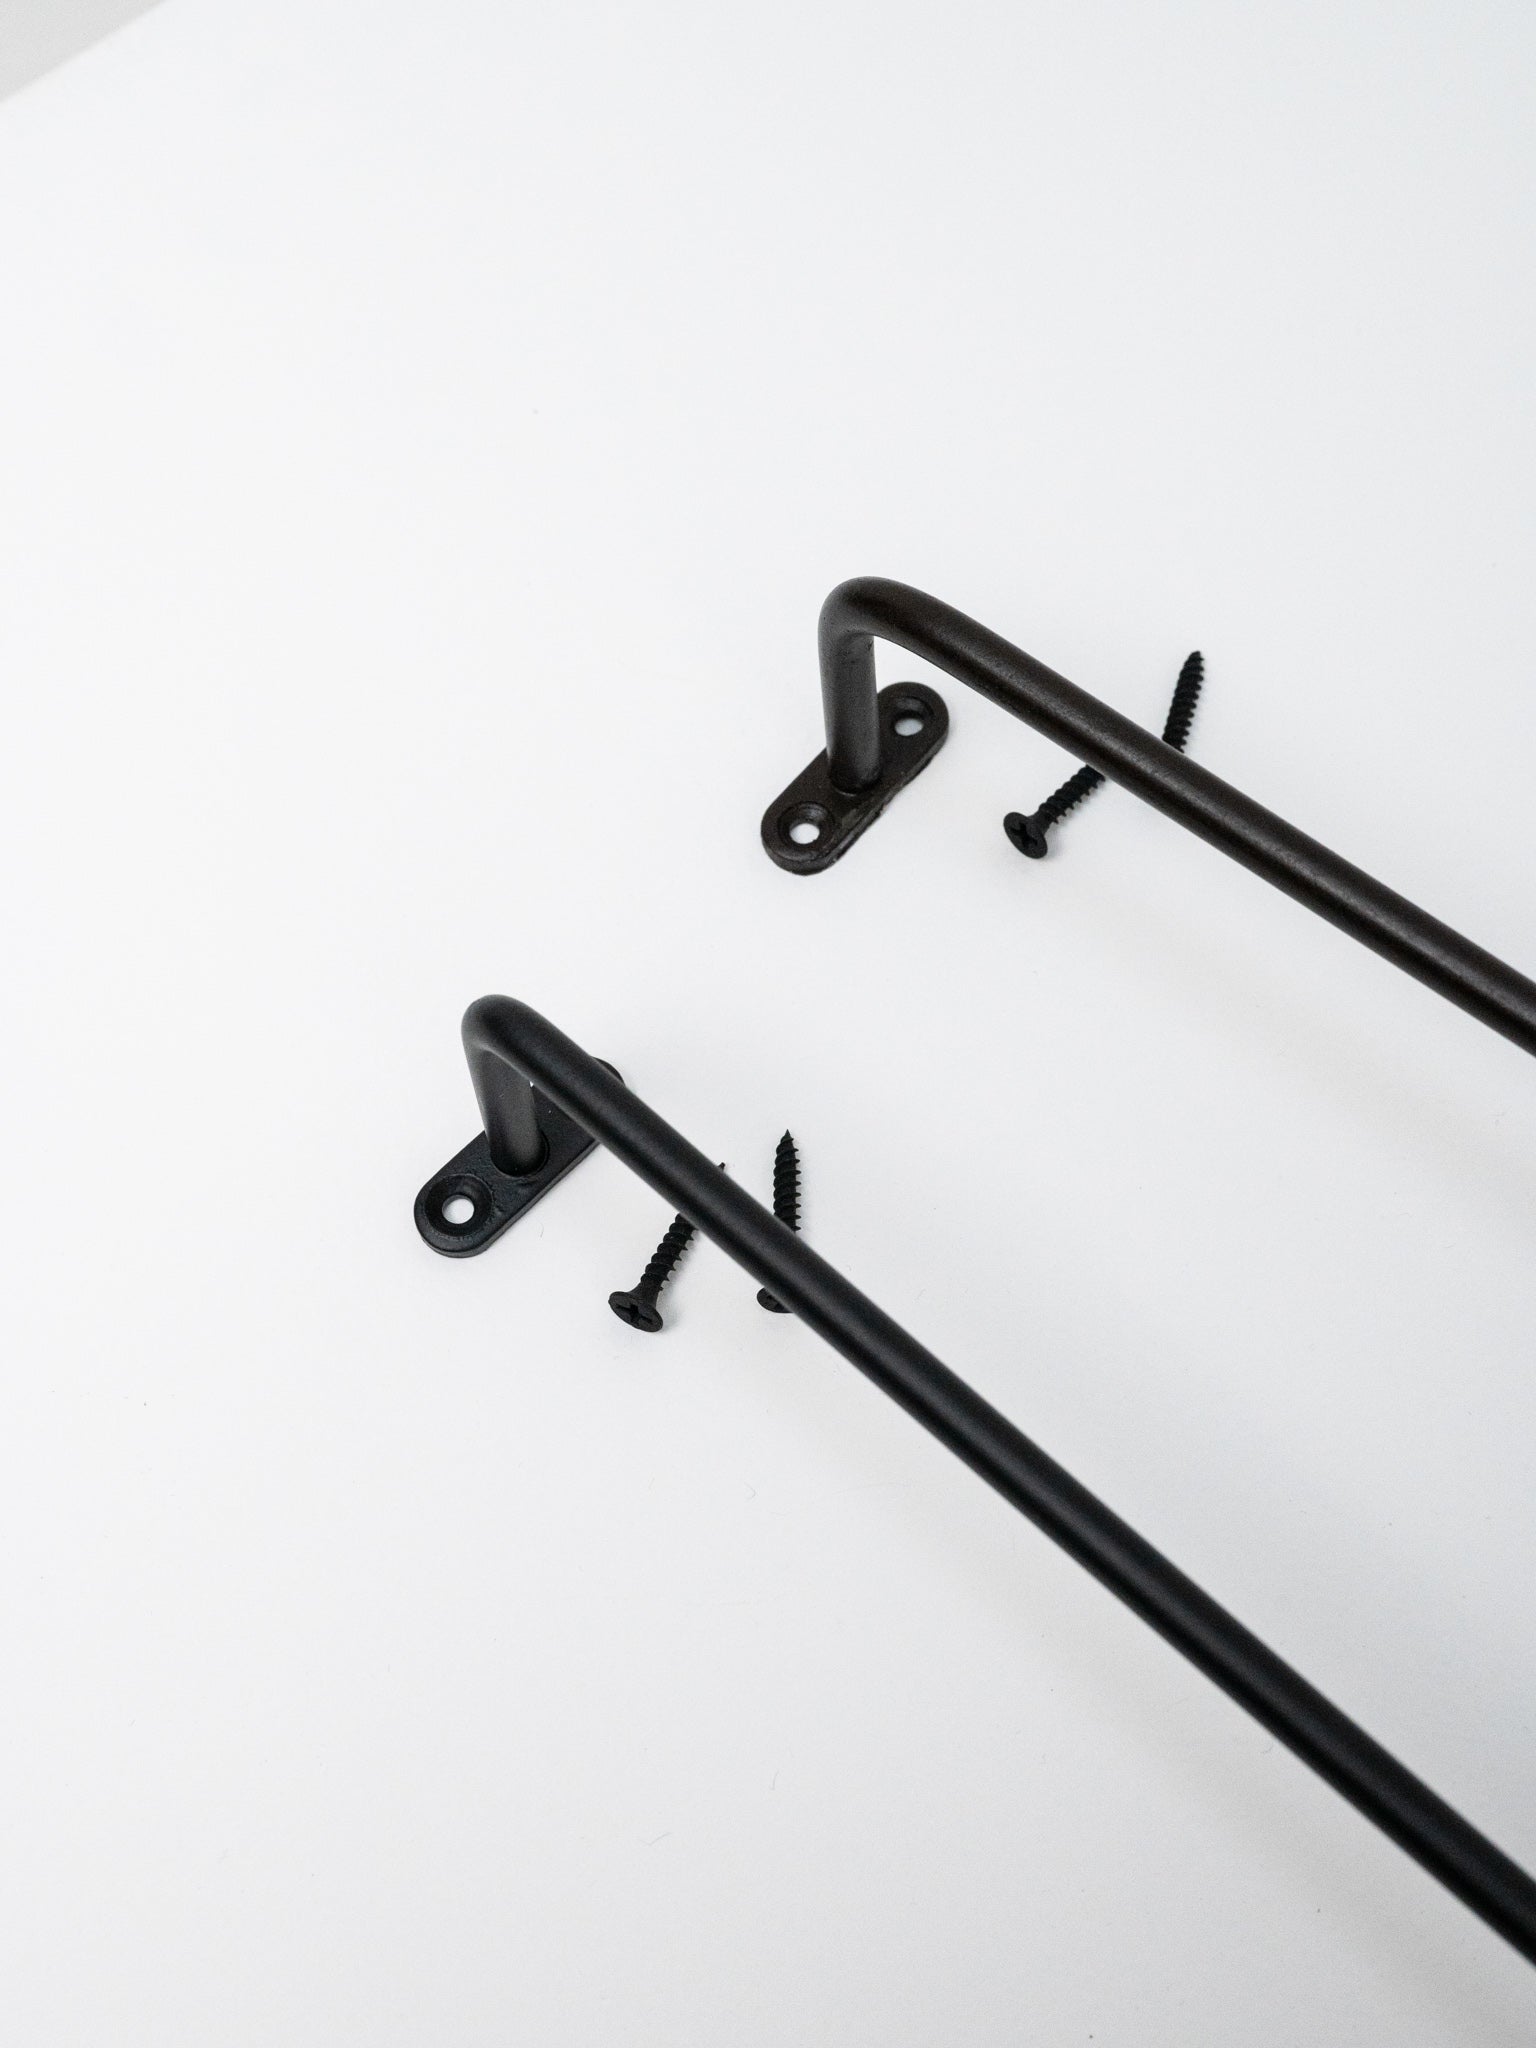 Iron Rail for hooks or towels, (two size options)